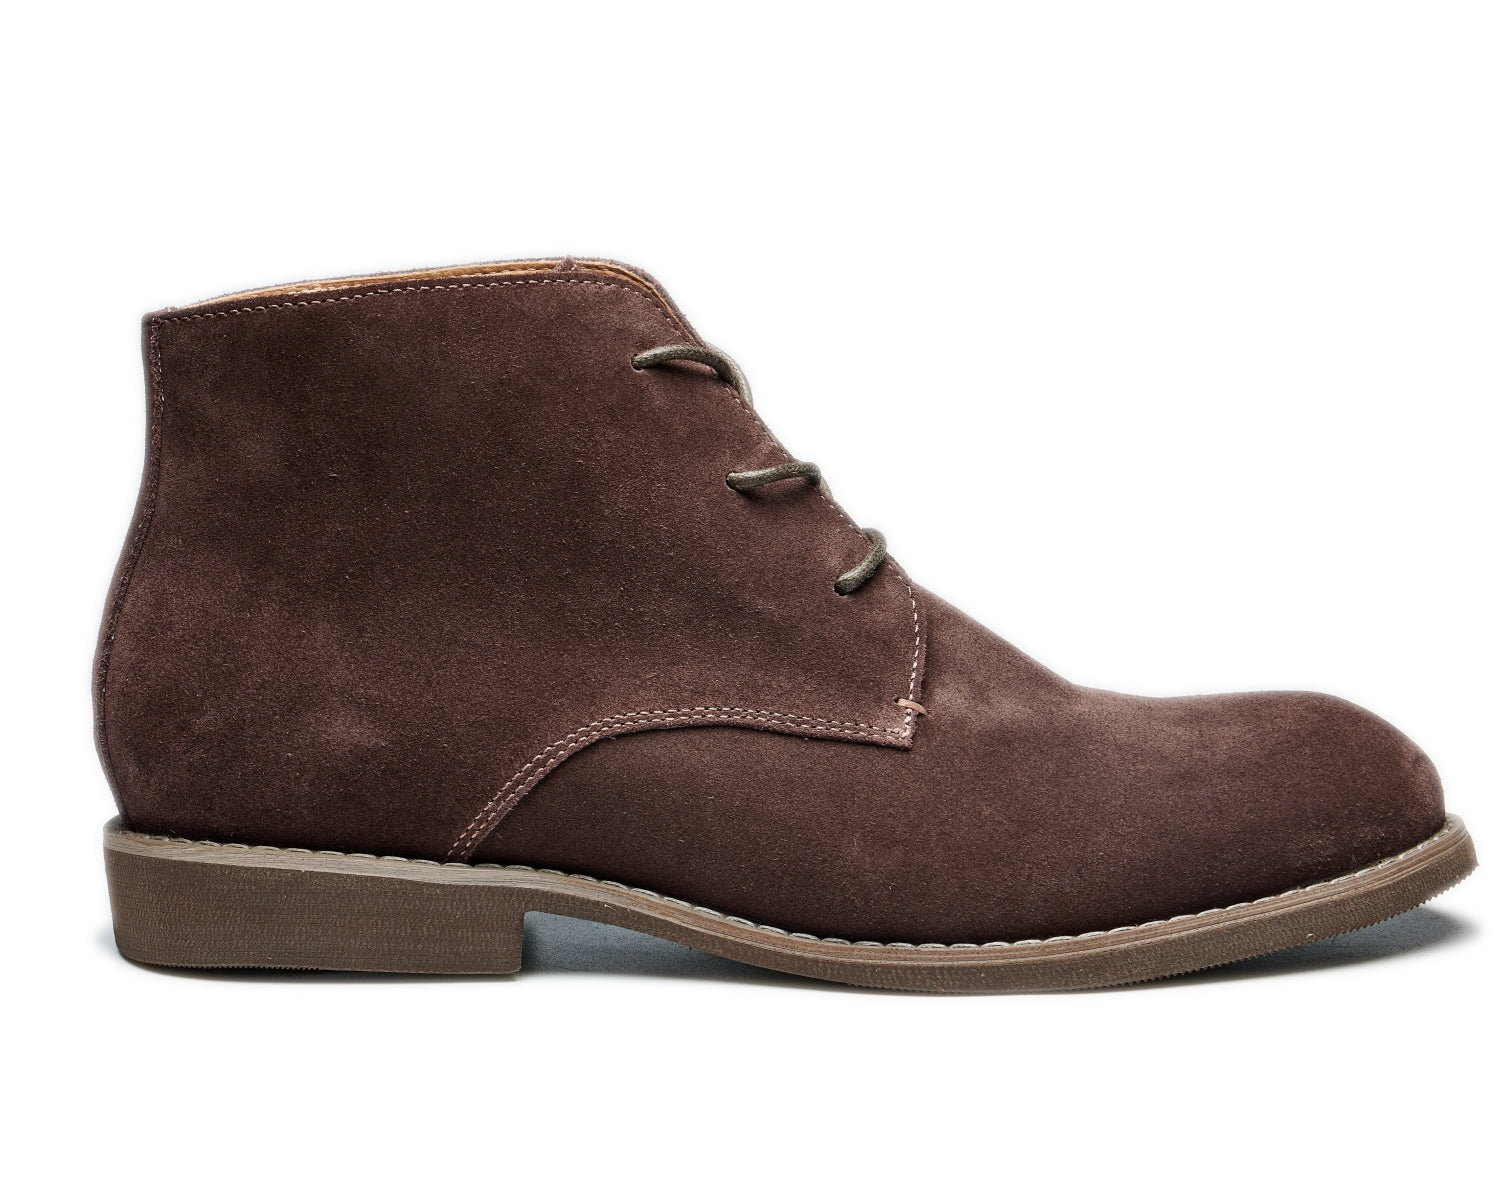 Men's suede chukka boots in various styles including manner, old, and skin designs4